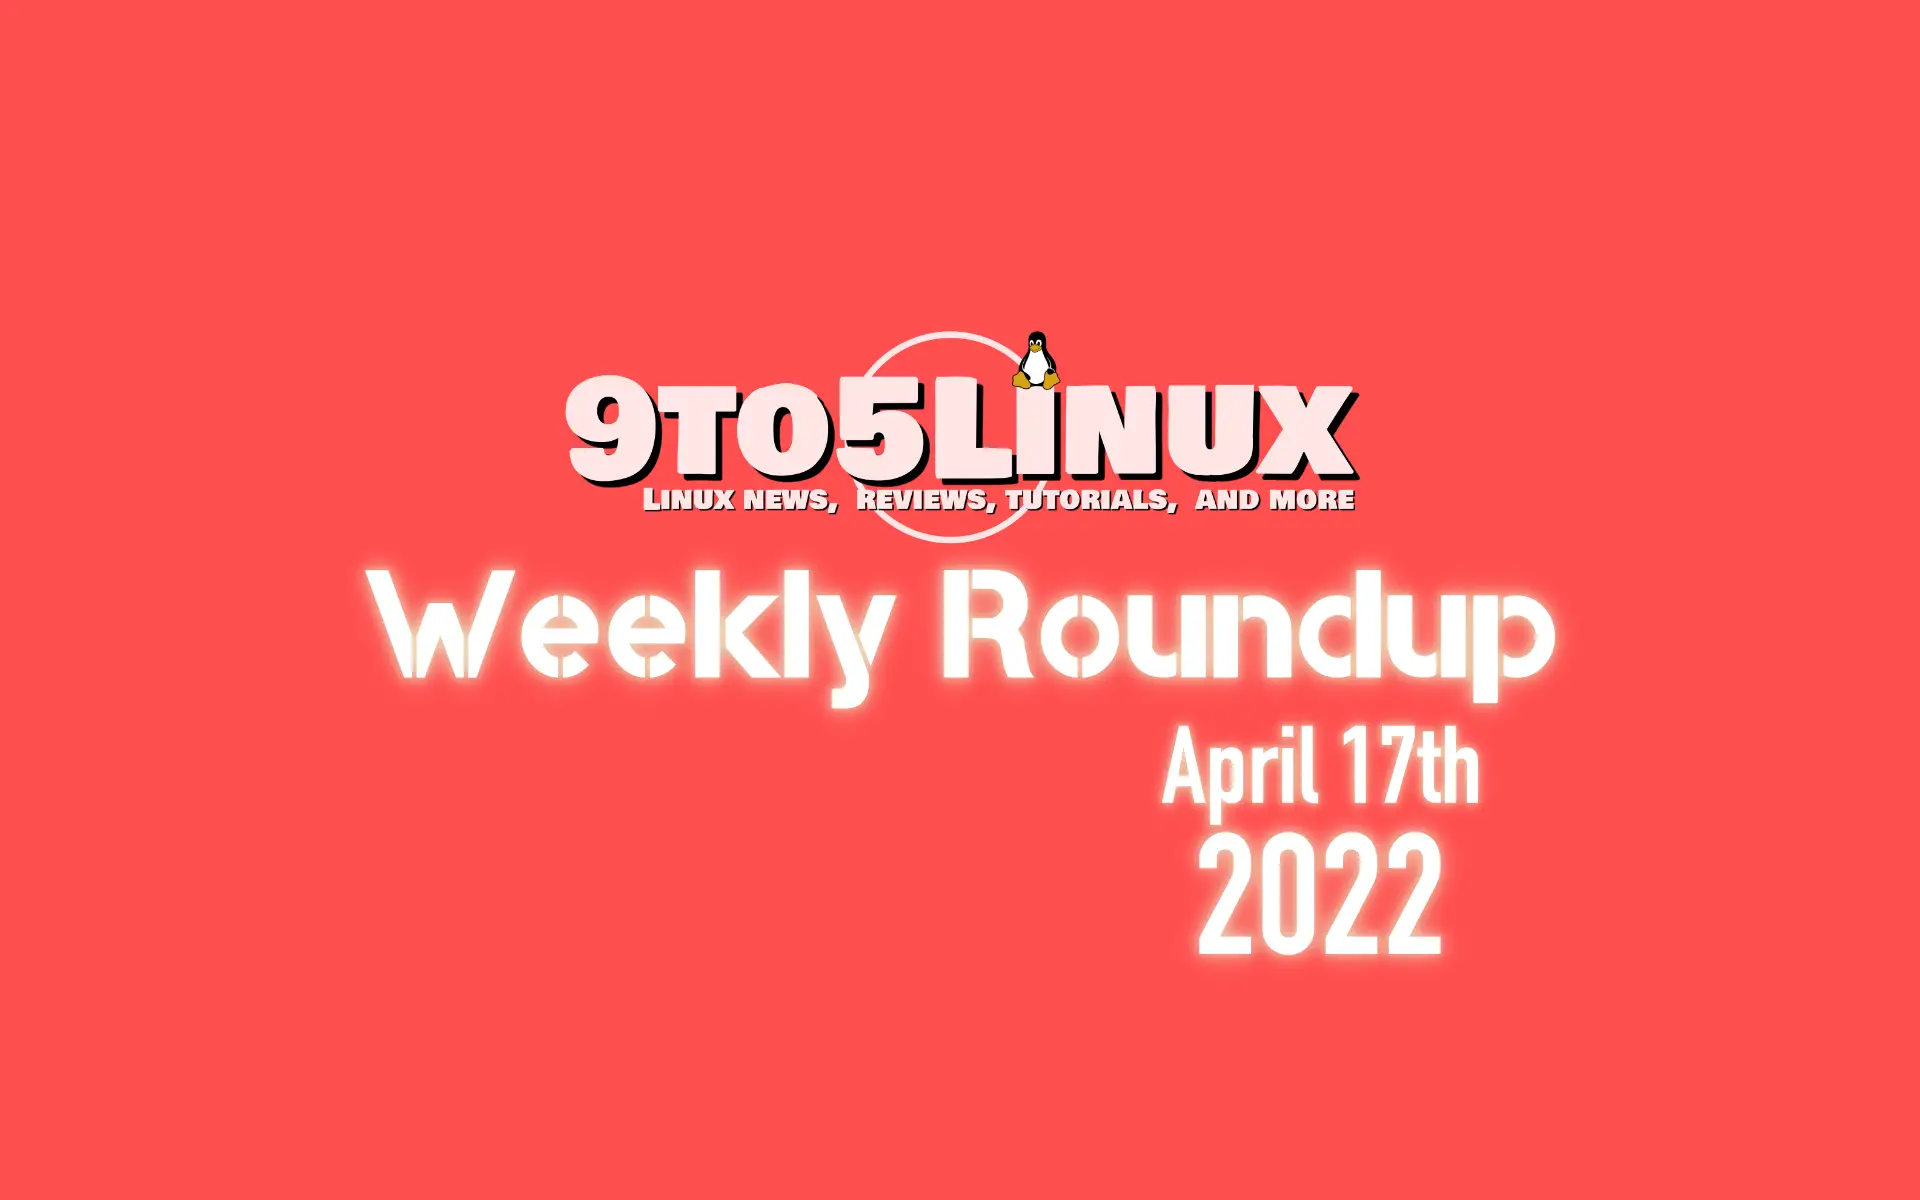 9to5Linux Weekly Roundup: April 17th, 2022